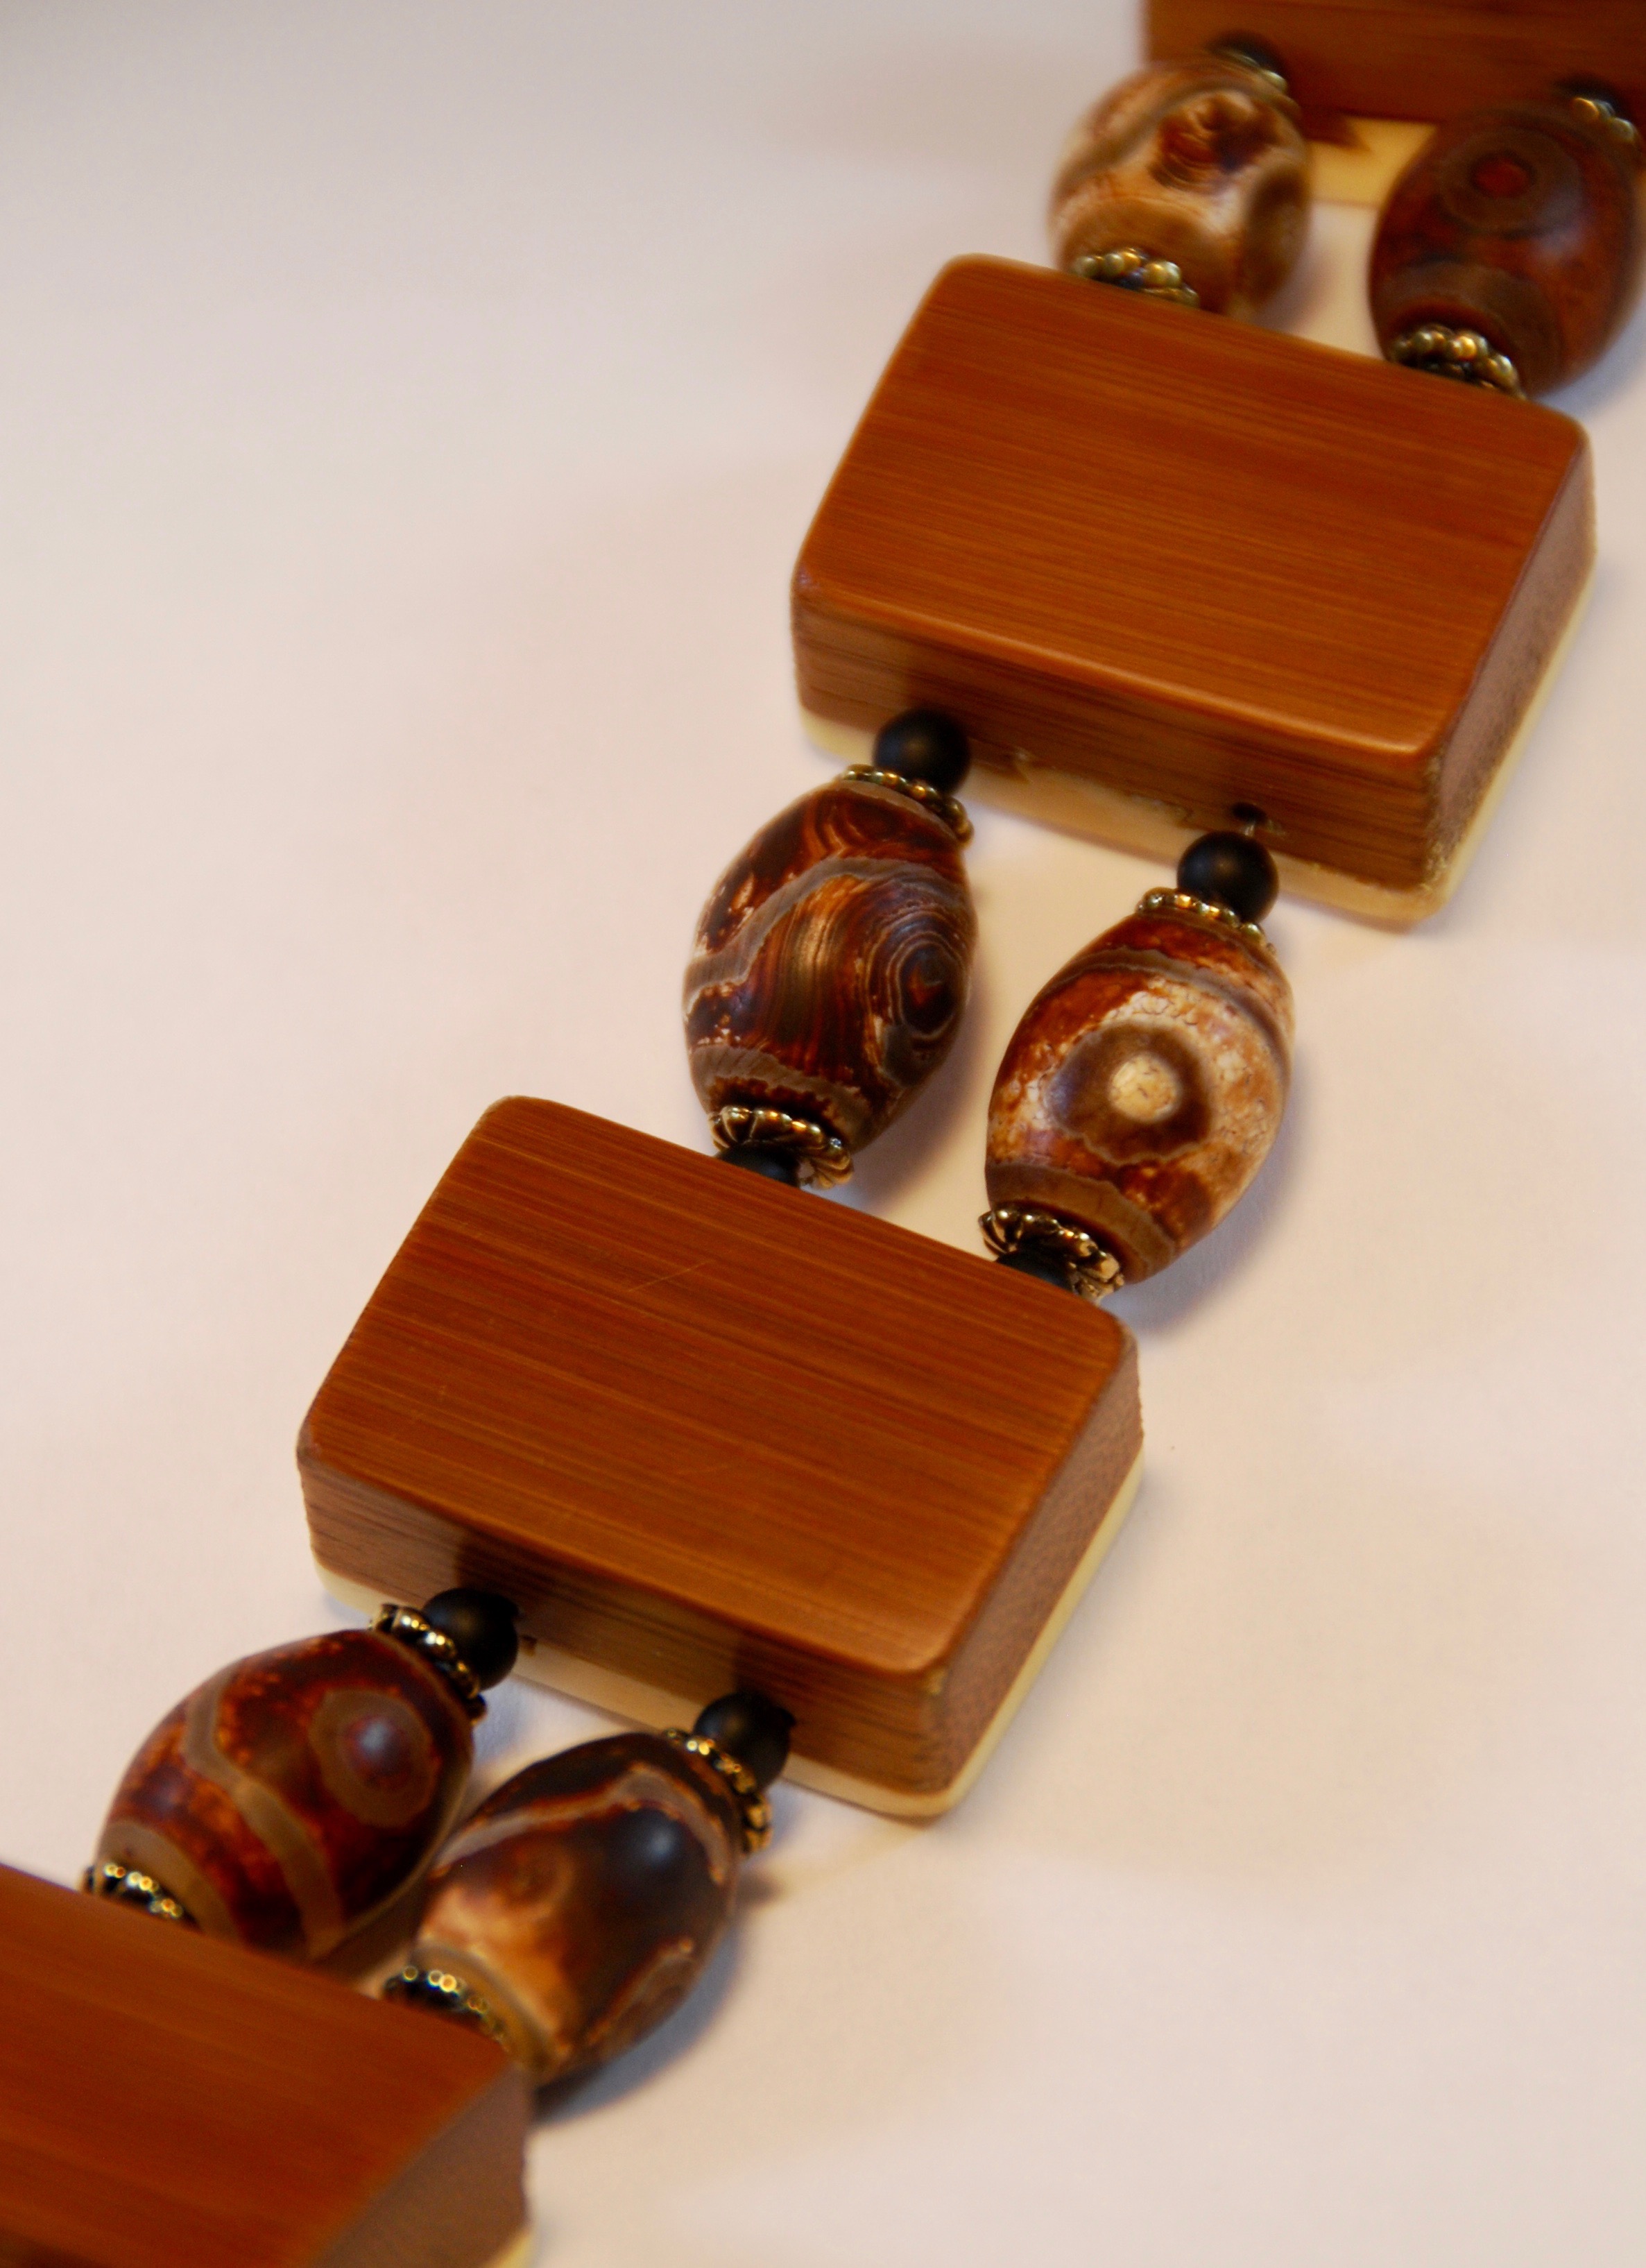 Aged Brown Agate Stone Beads (barrel shaped)